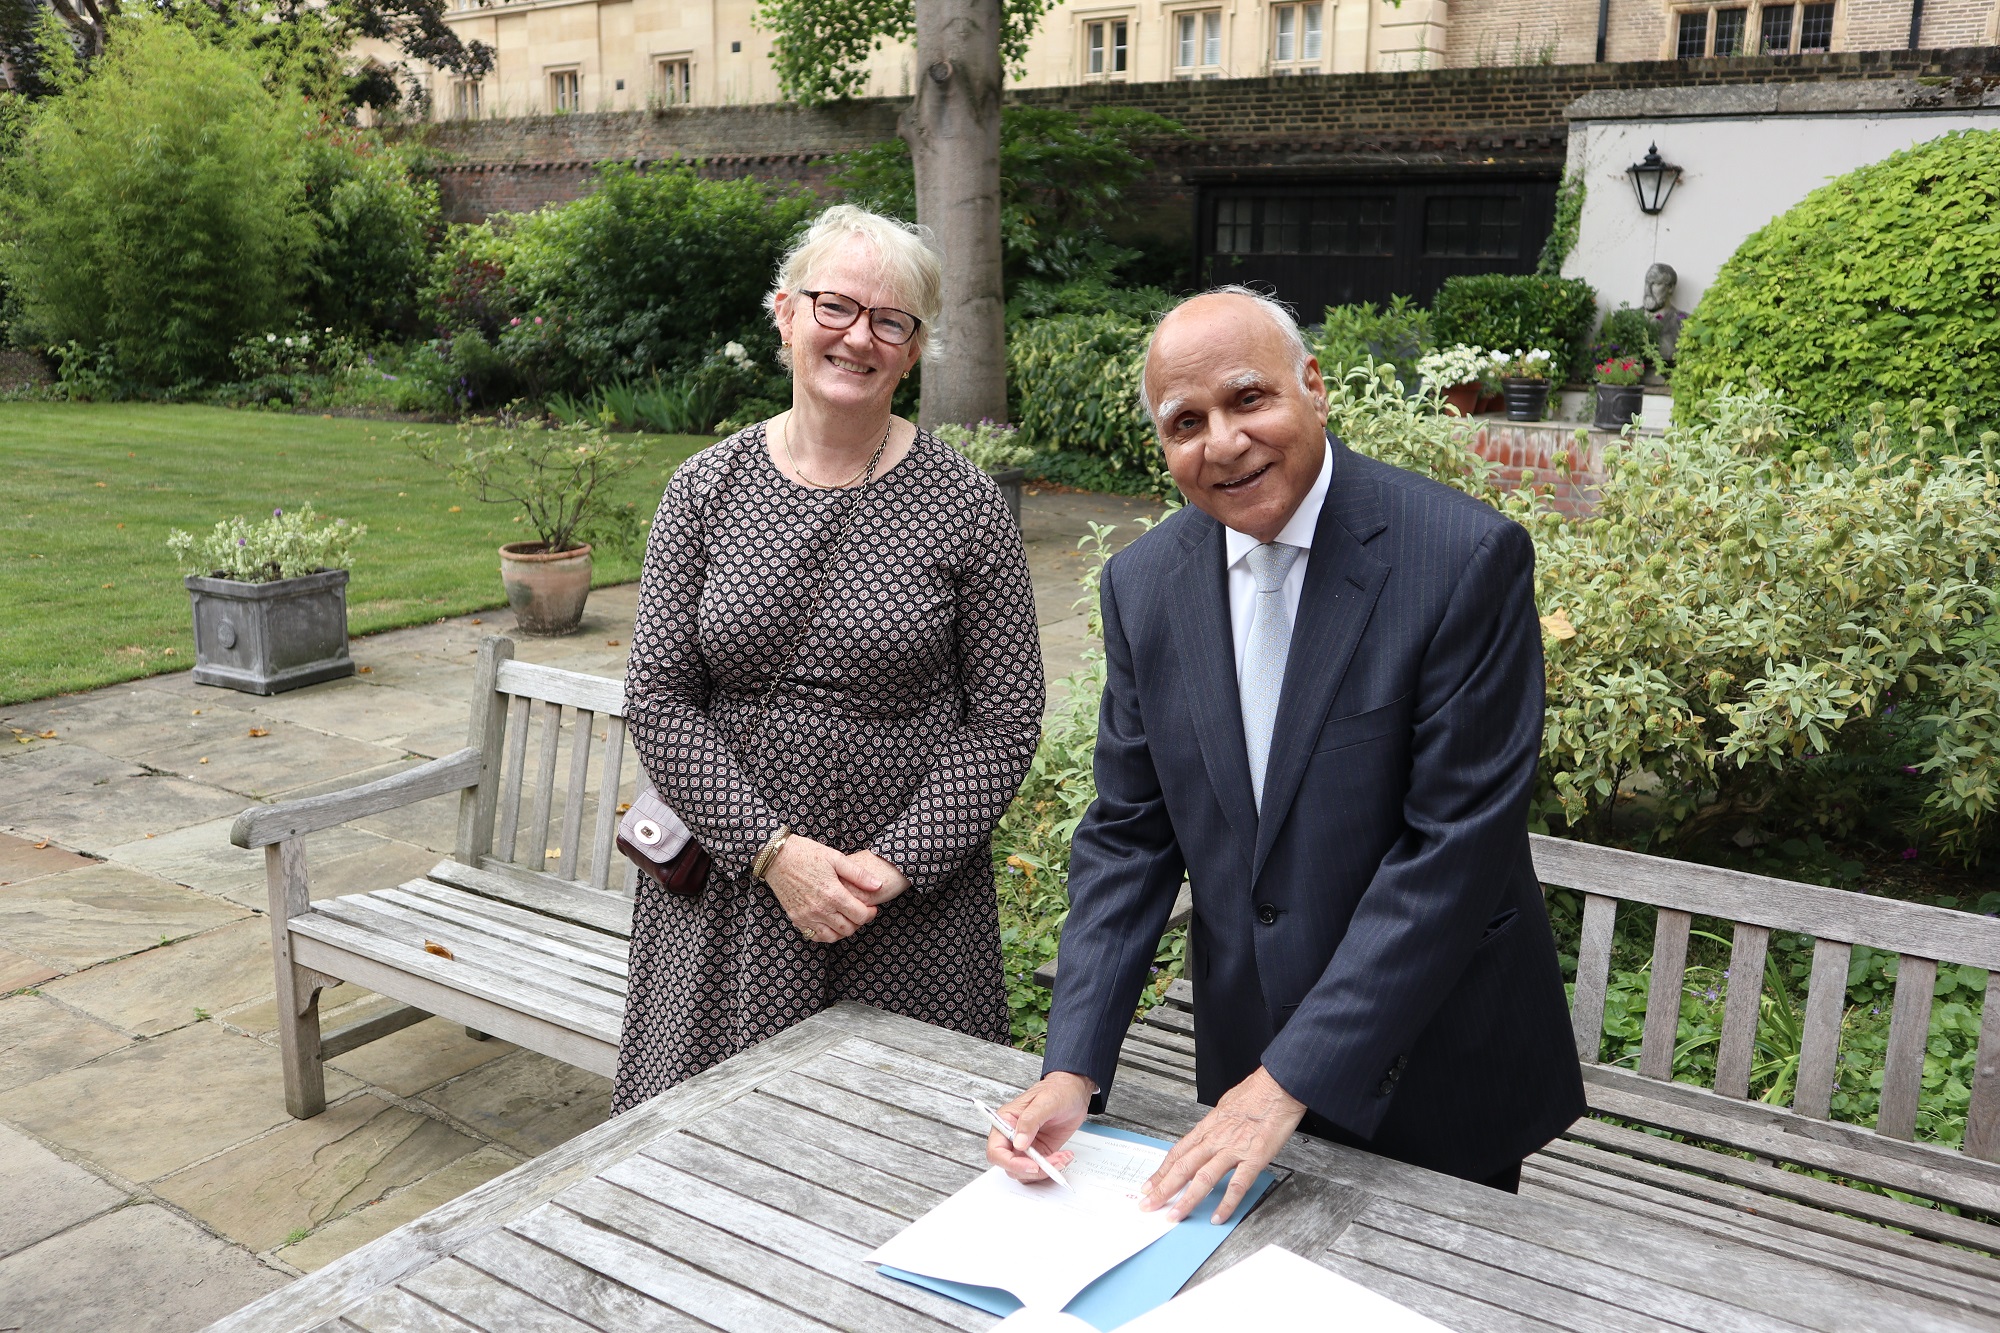 Dr Pippa Rogerson and Sir Anwar Pervez signing a scholarship agreement